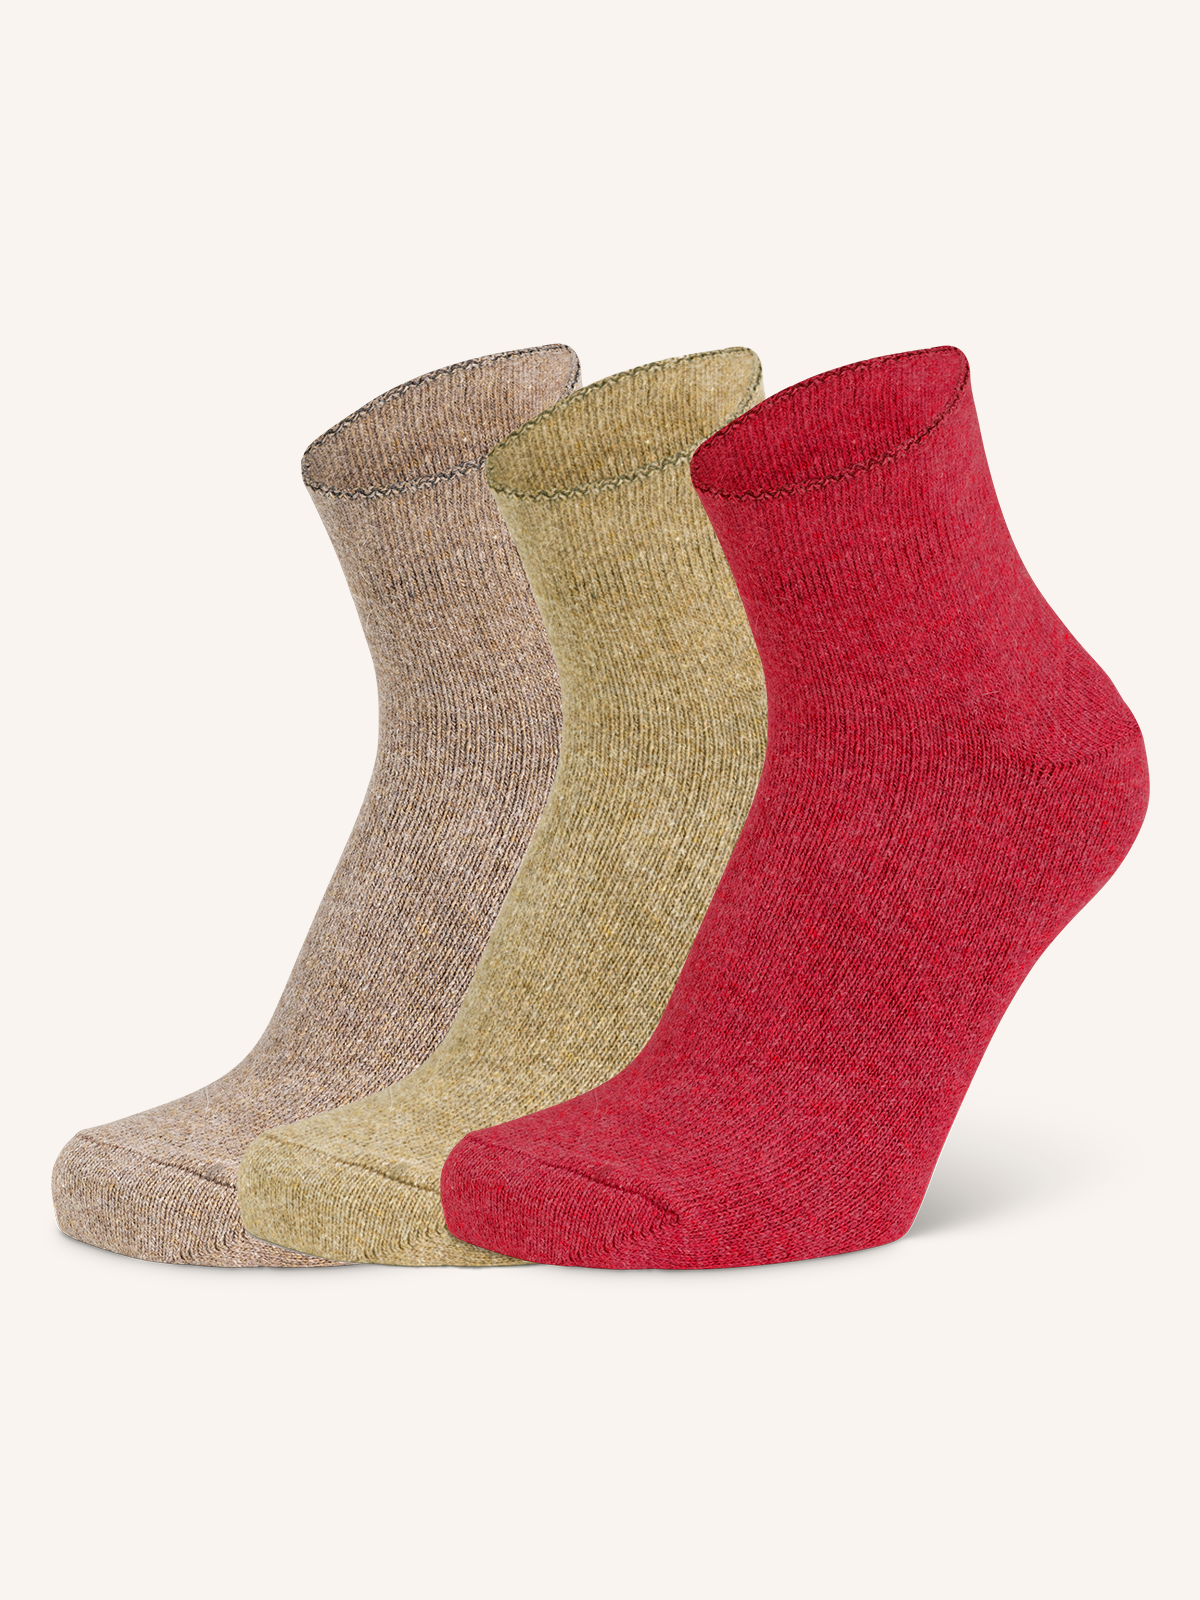 Short Socks in Angora, Cotton and Viscose for Women | Plain Color | Pack of 3 Pairs | Ancot